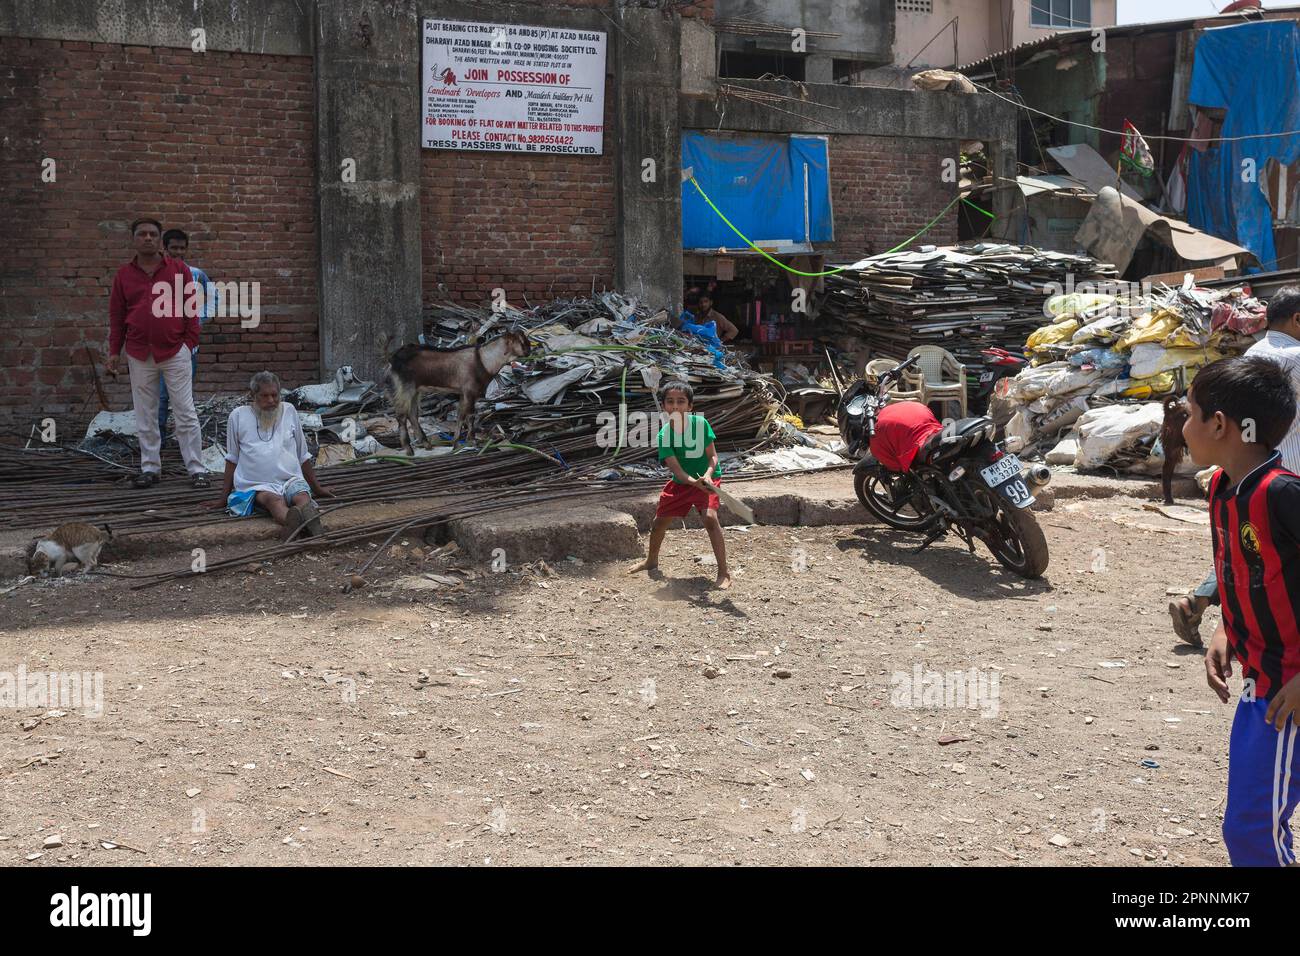 Cricket is a popular sport in India, across all social classes, children playing in a backyard, Dharavi, largest slum in Asia with up to 600, 000 Stock Photo